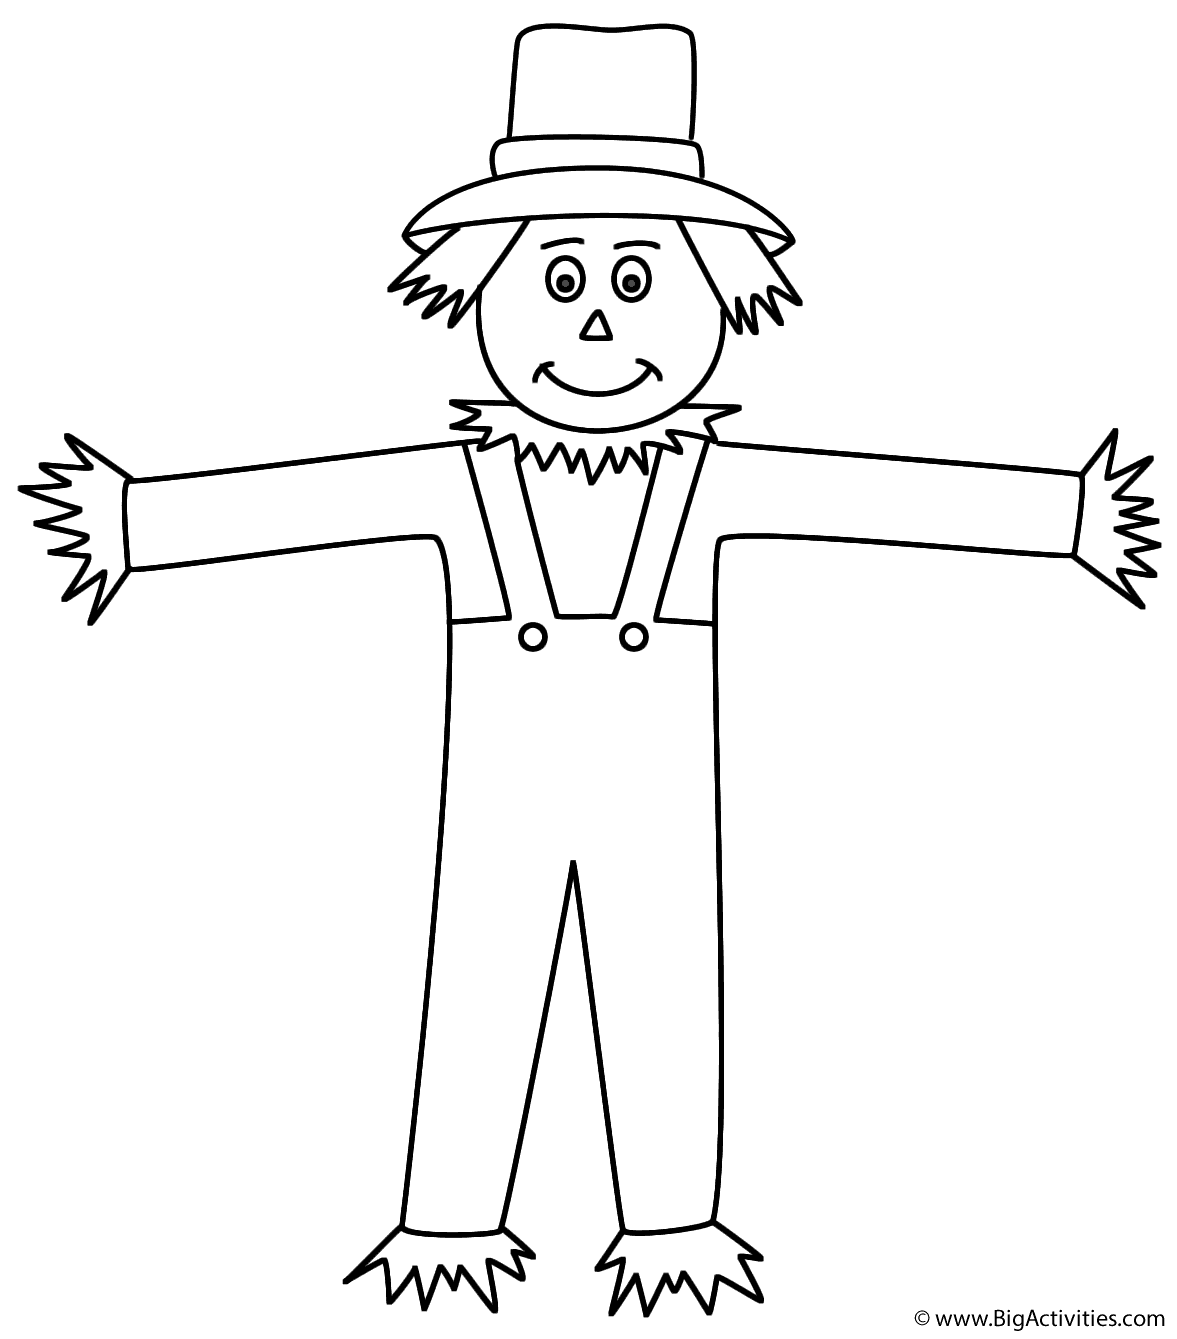 scarecrow-coloring-page-halloween